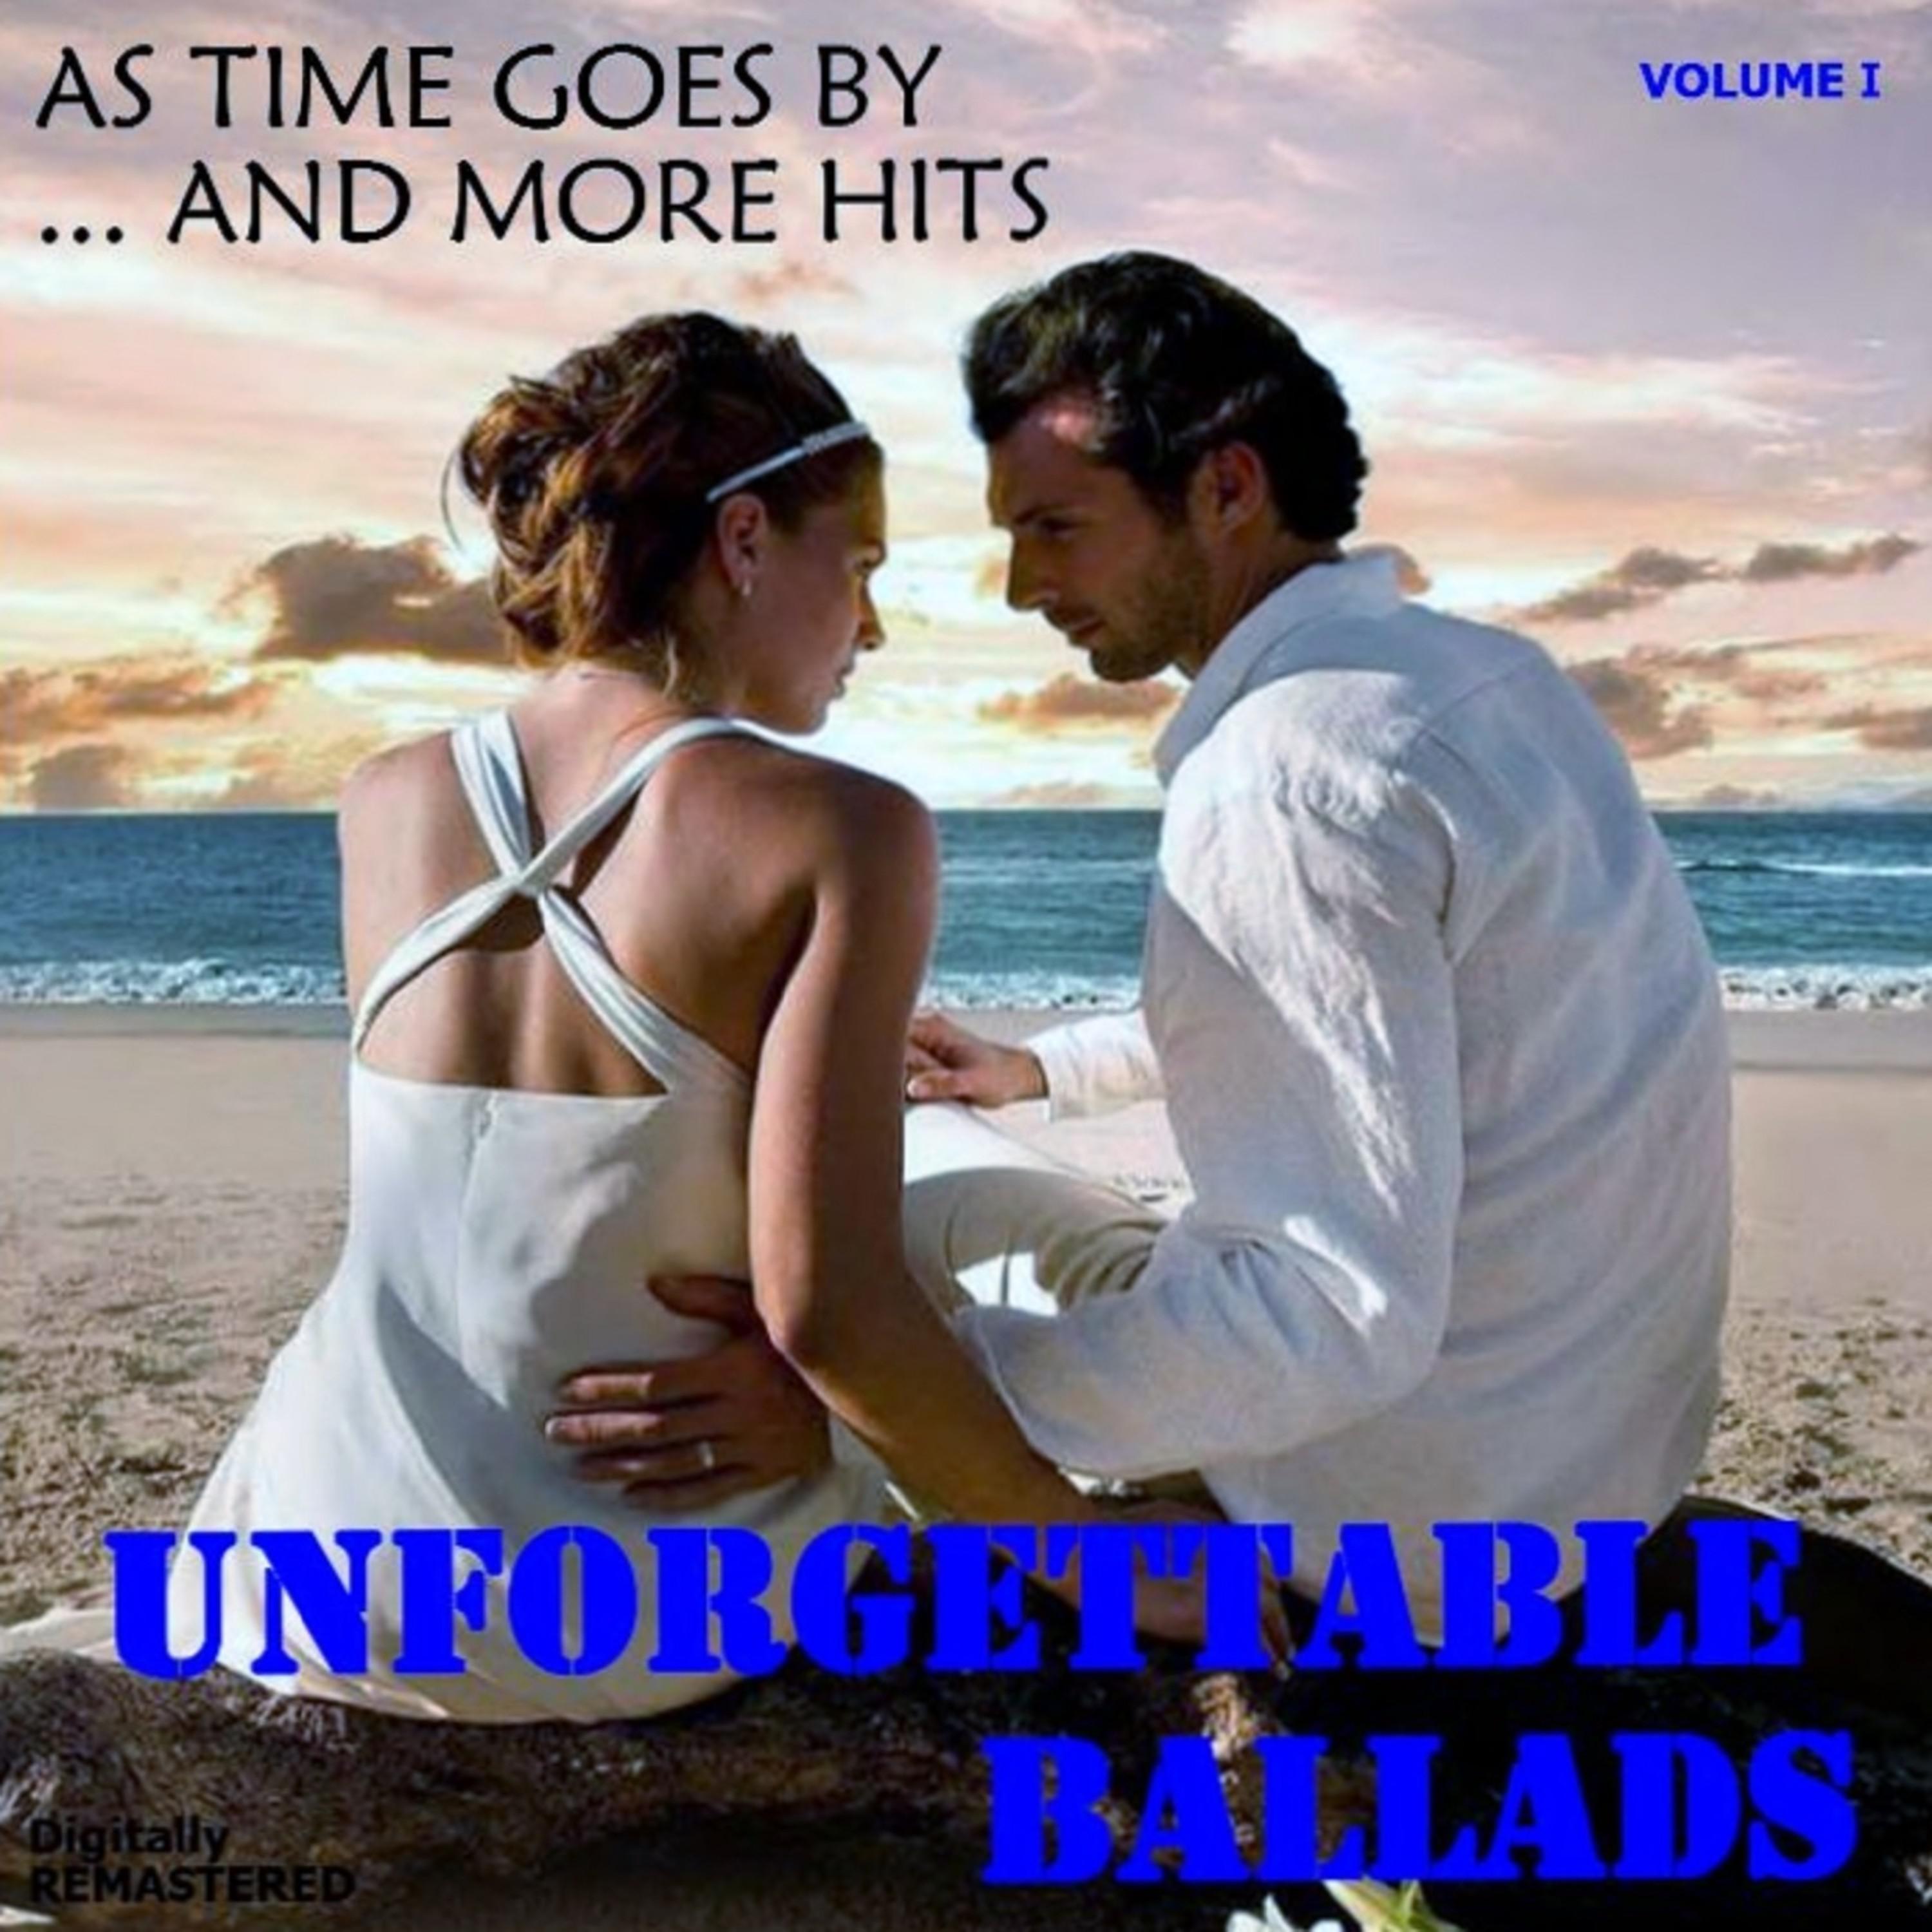 Unforgettable Ballads, Vol. I: As Time Goes By... and More Hits (Remastered)